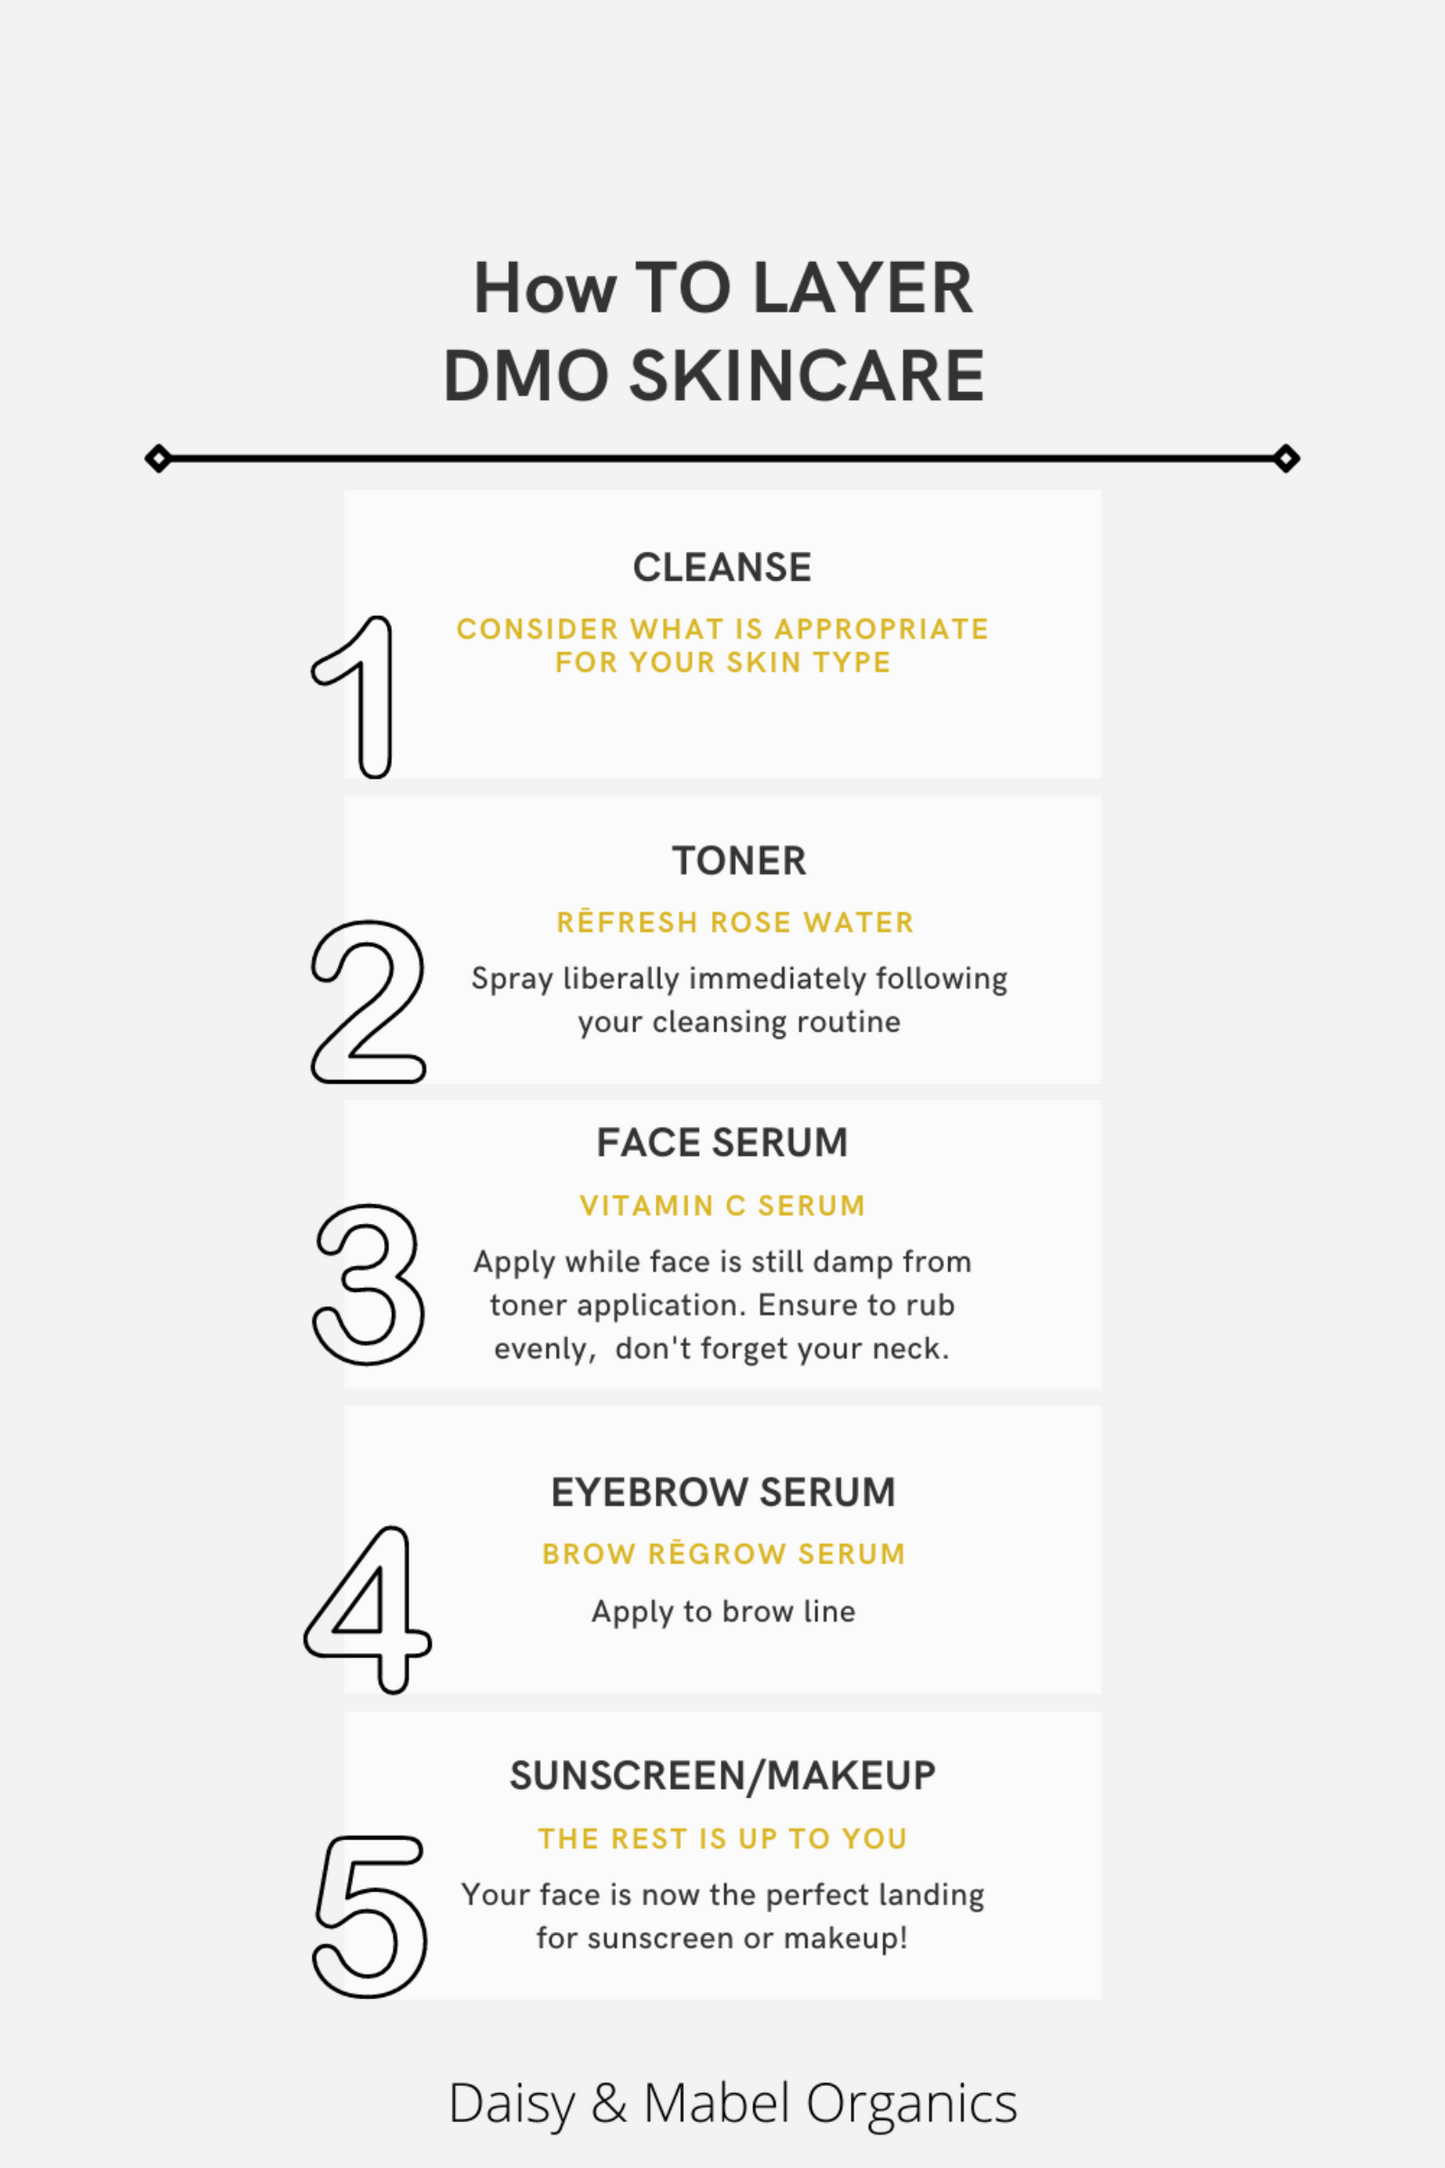 how to layer natural skin care beauty product infographic daisy and mabel organics